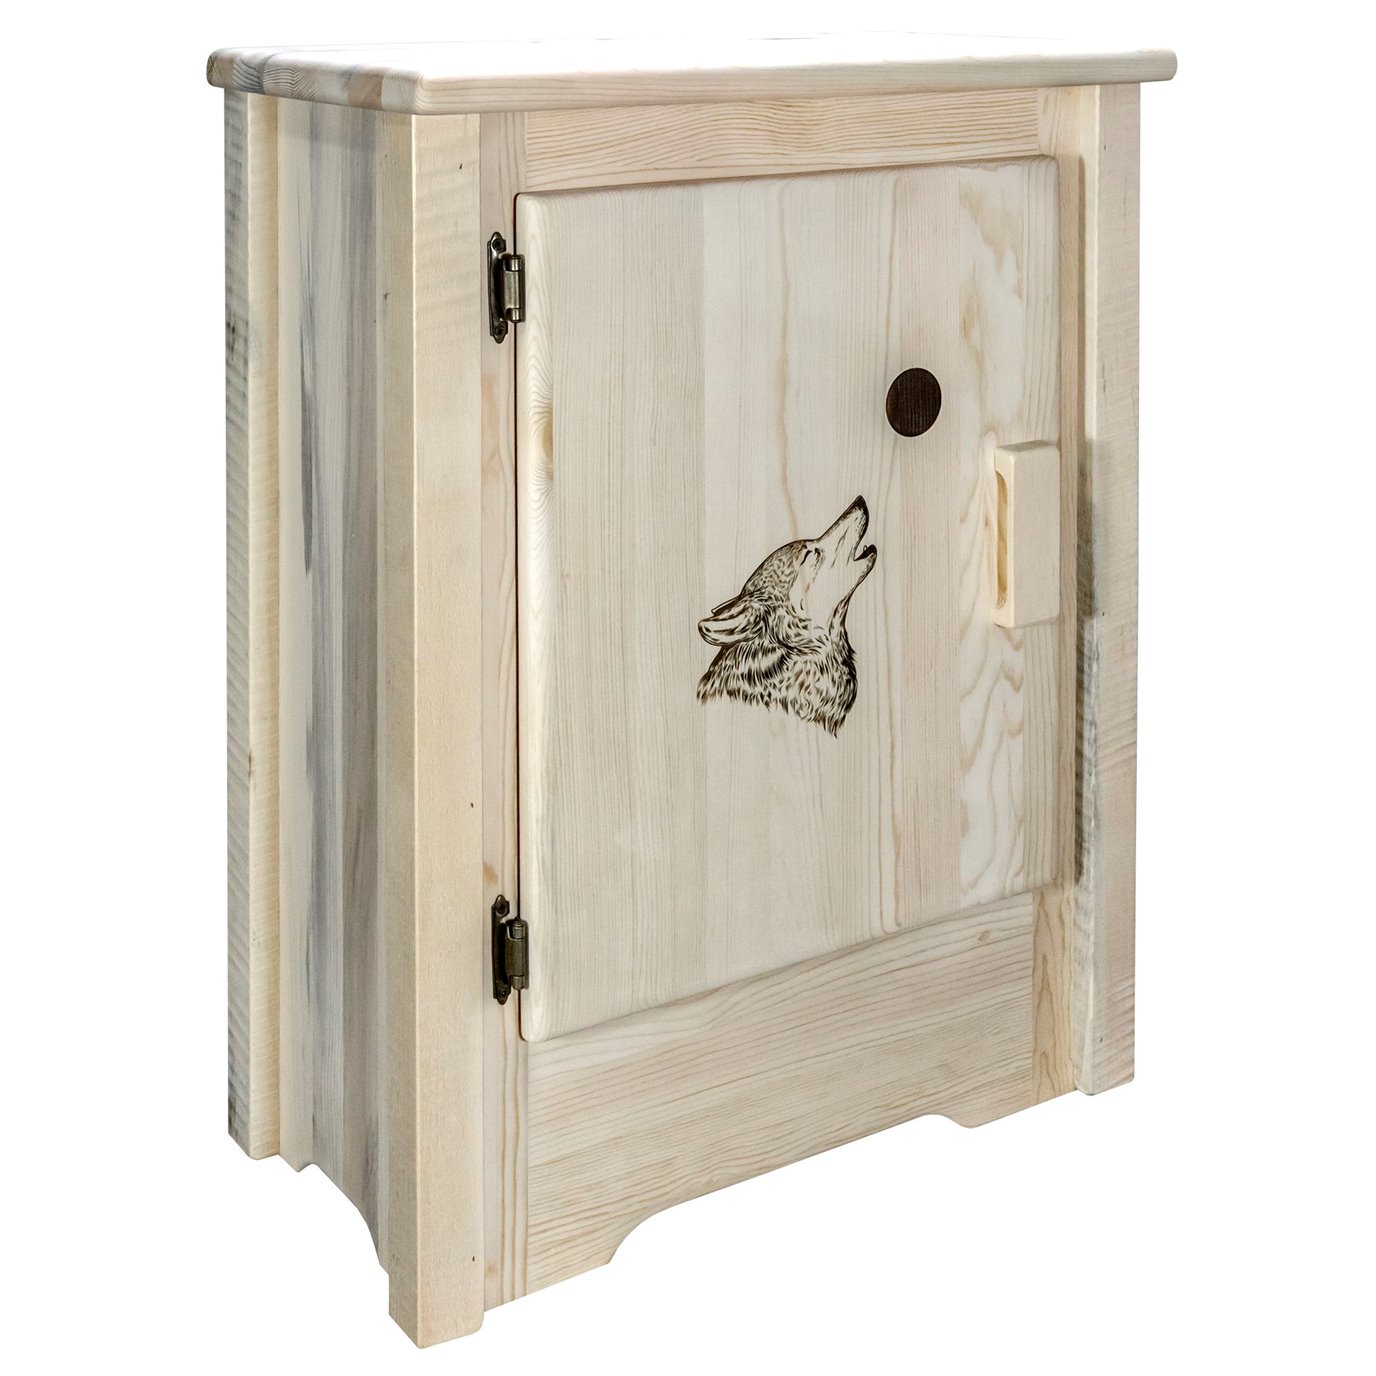 Homestead Left Hinged Accent Cabinet w/ Laser Engraved Wolf Design - Clear Lacquer Finish